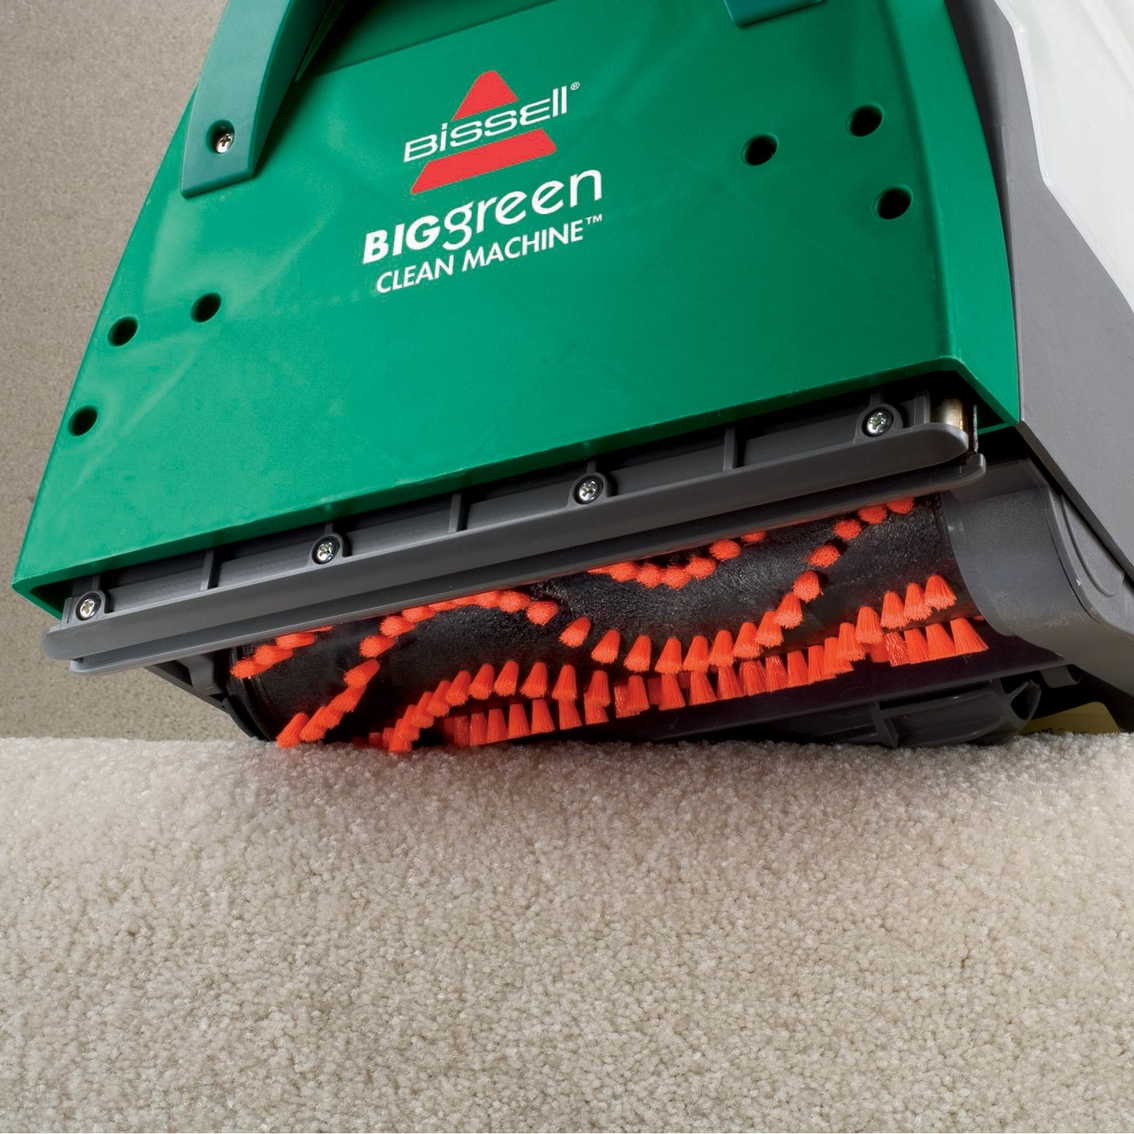 Bissell Big Green Machine Professional Carpet Cleaner - Image 4 of 6